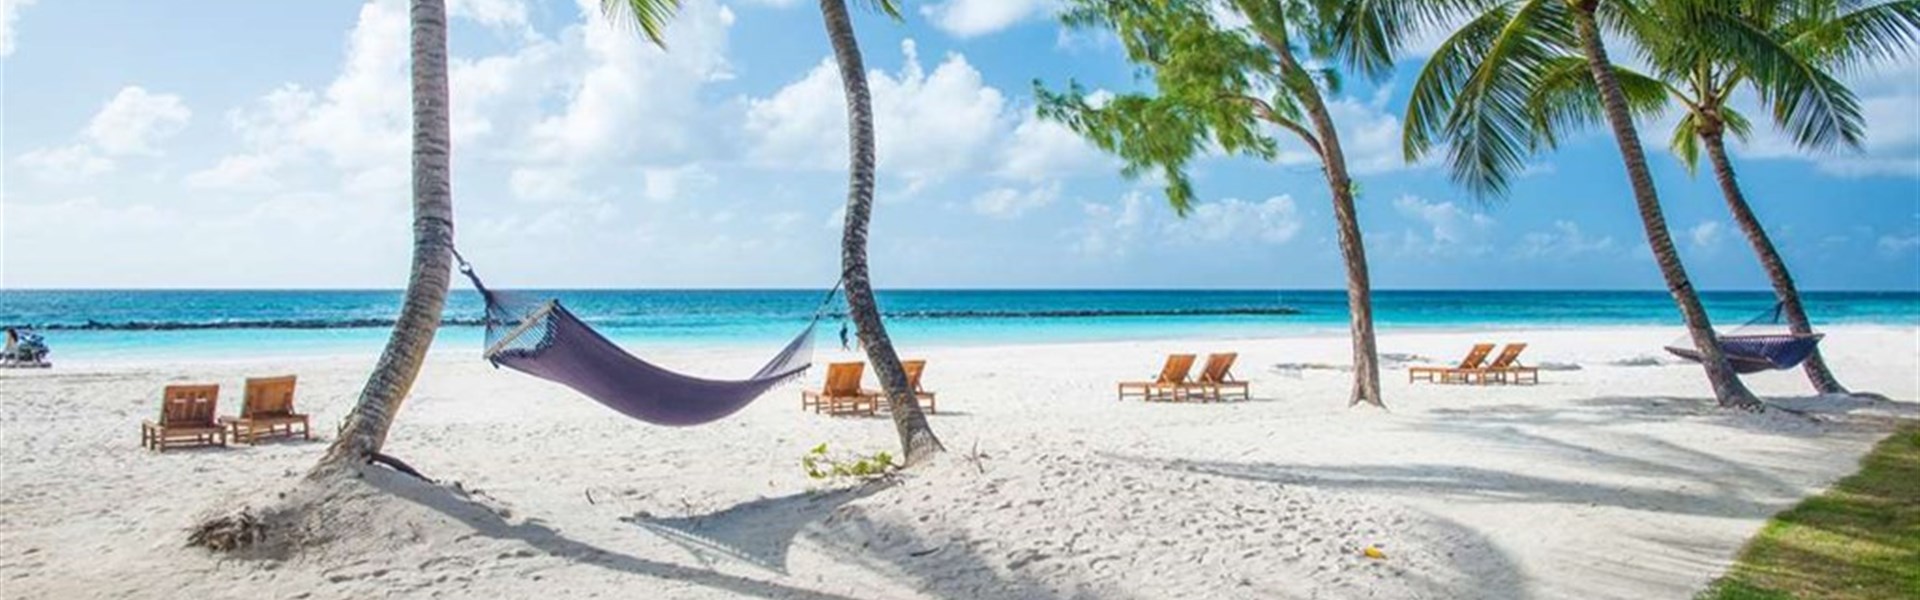 Sandals Royal Barbados 5* - Adults Only - 